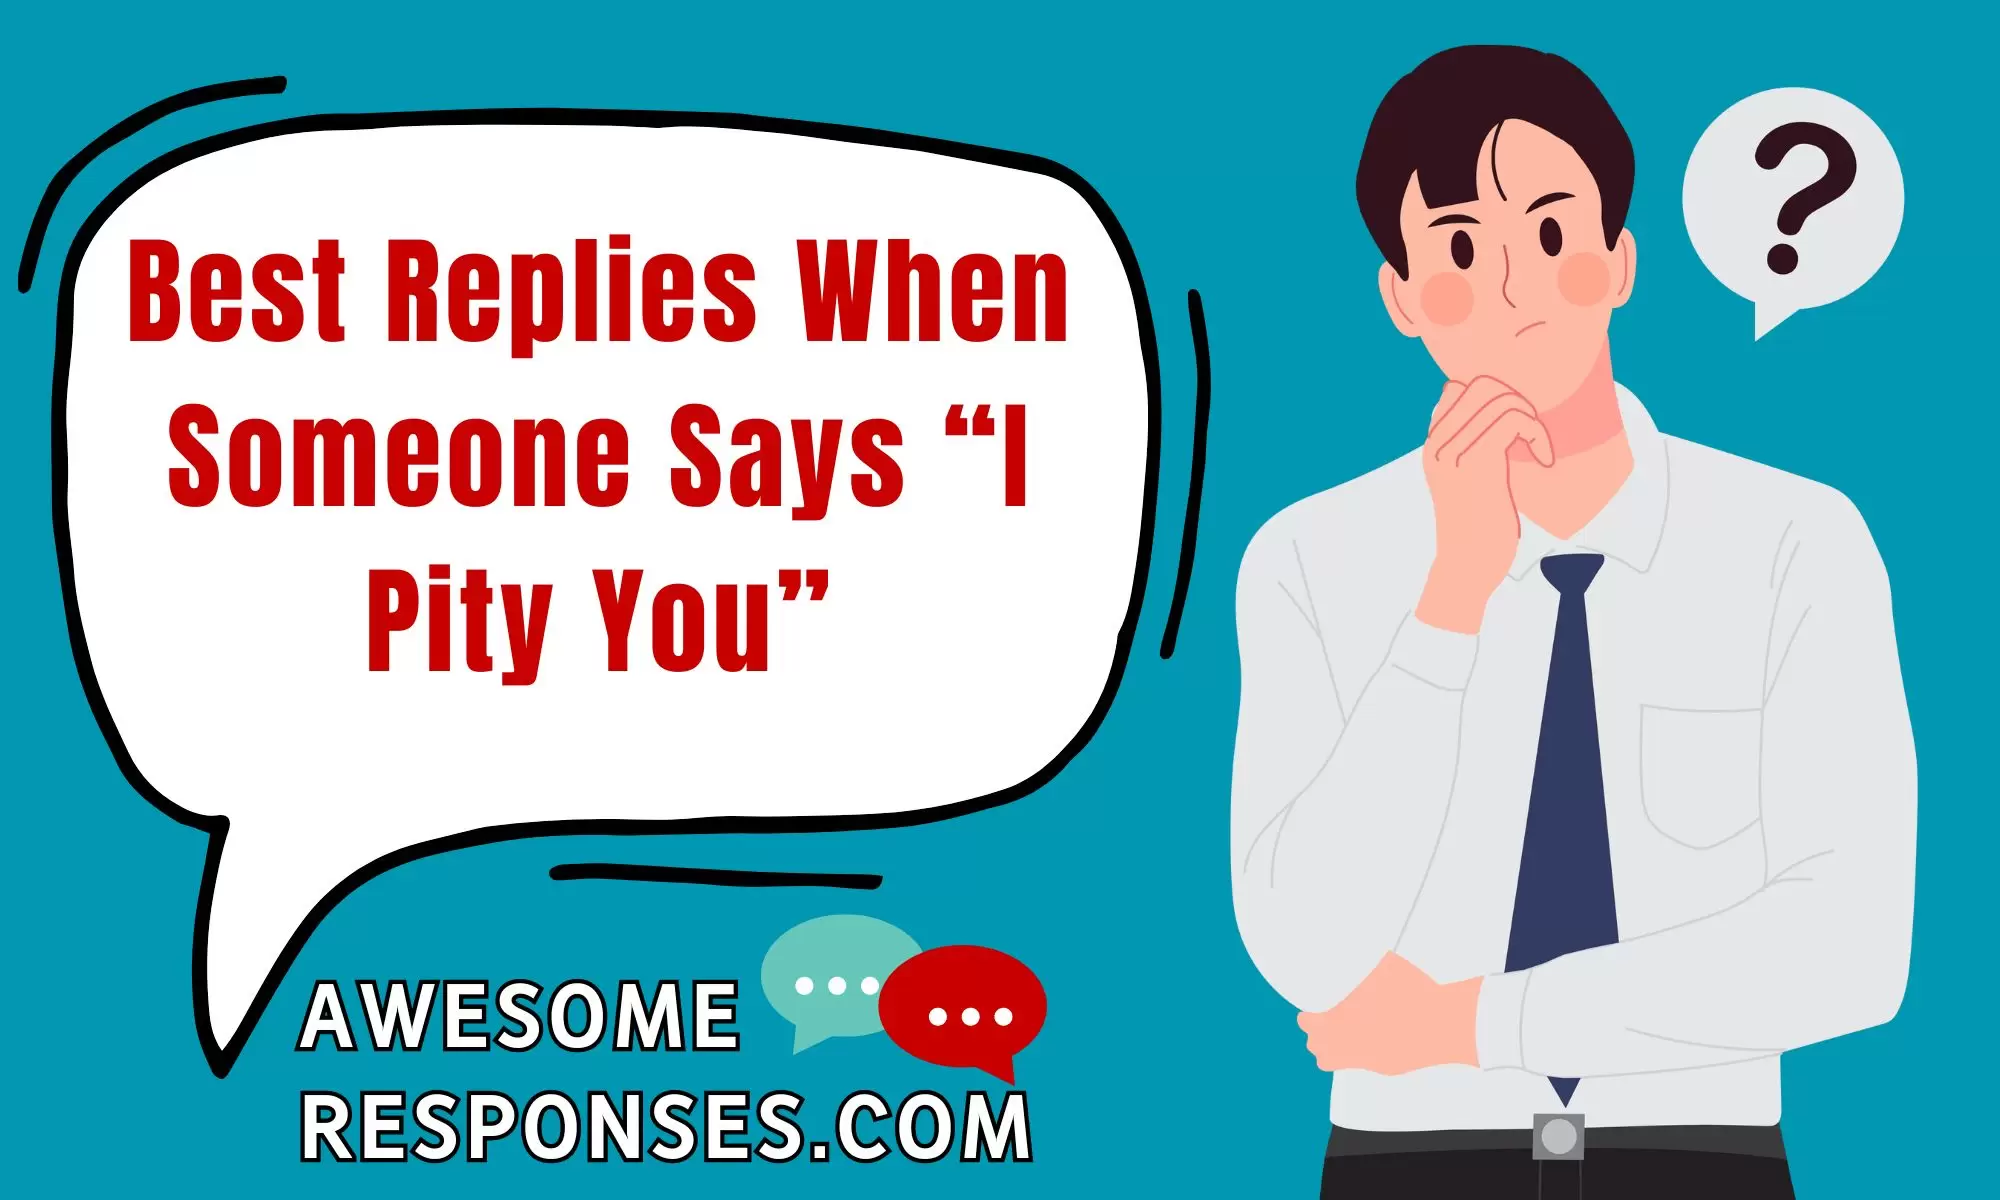 Best Replies When Someone Says “I Pity You”